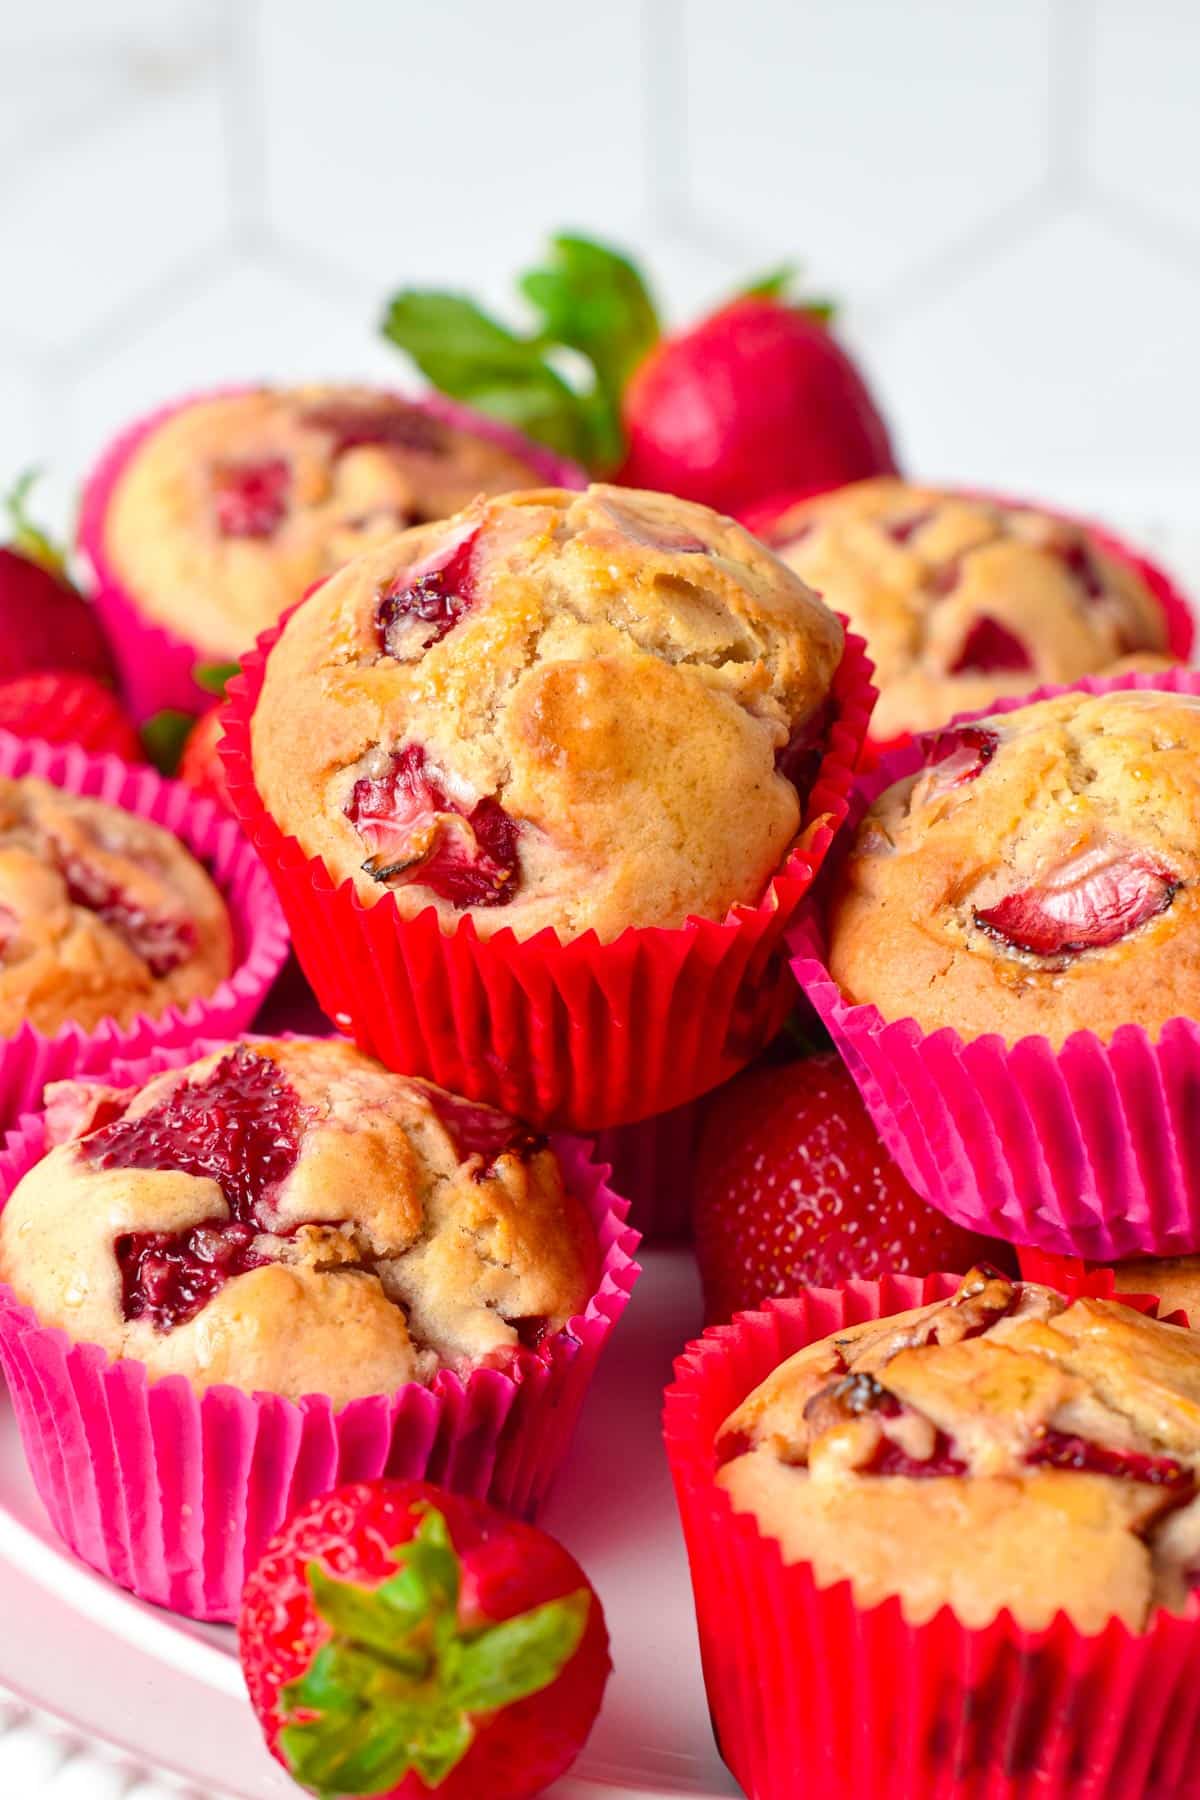 A stack of vegan strawberry muffins in bright pink muffin cases with a golden fluffy crumb filled with juicy pieces of baked strawberries.